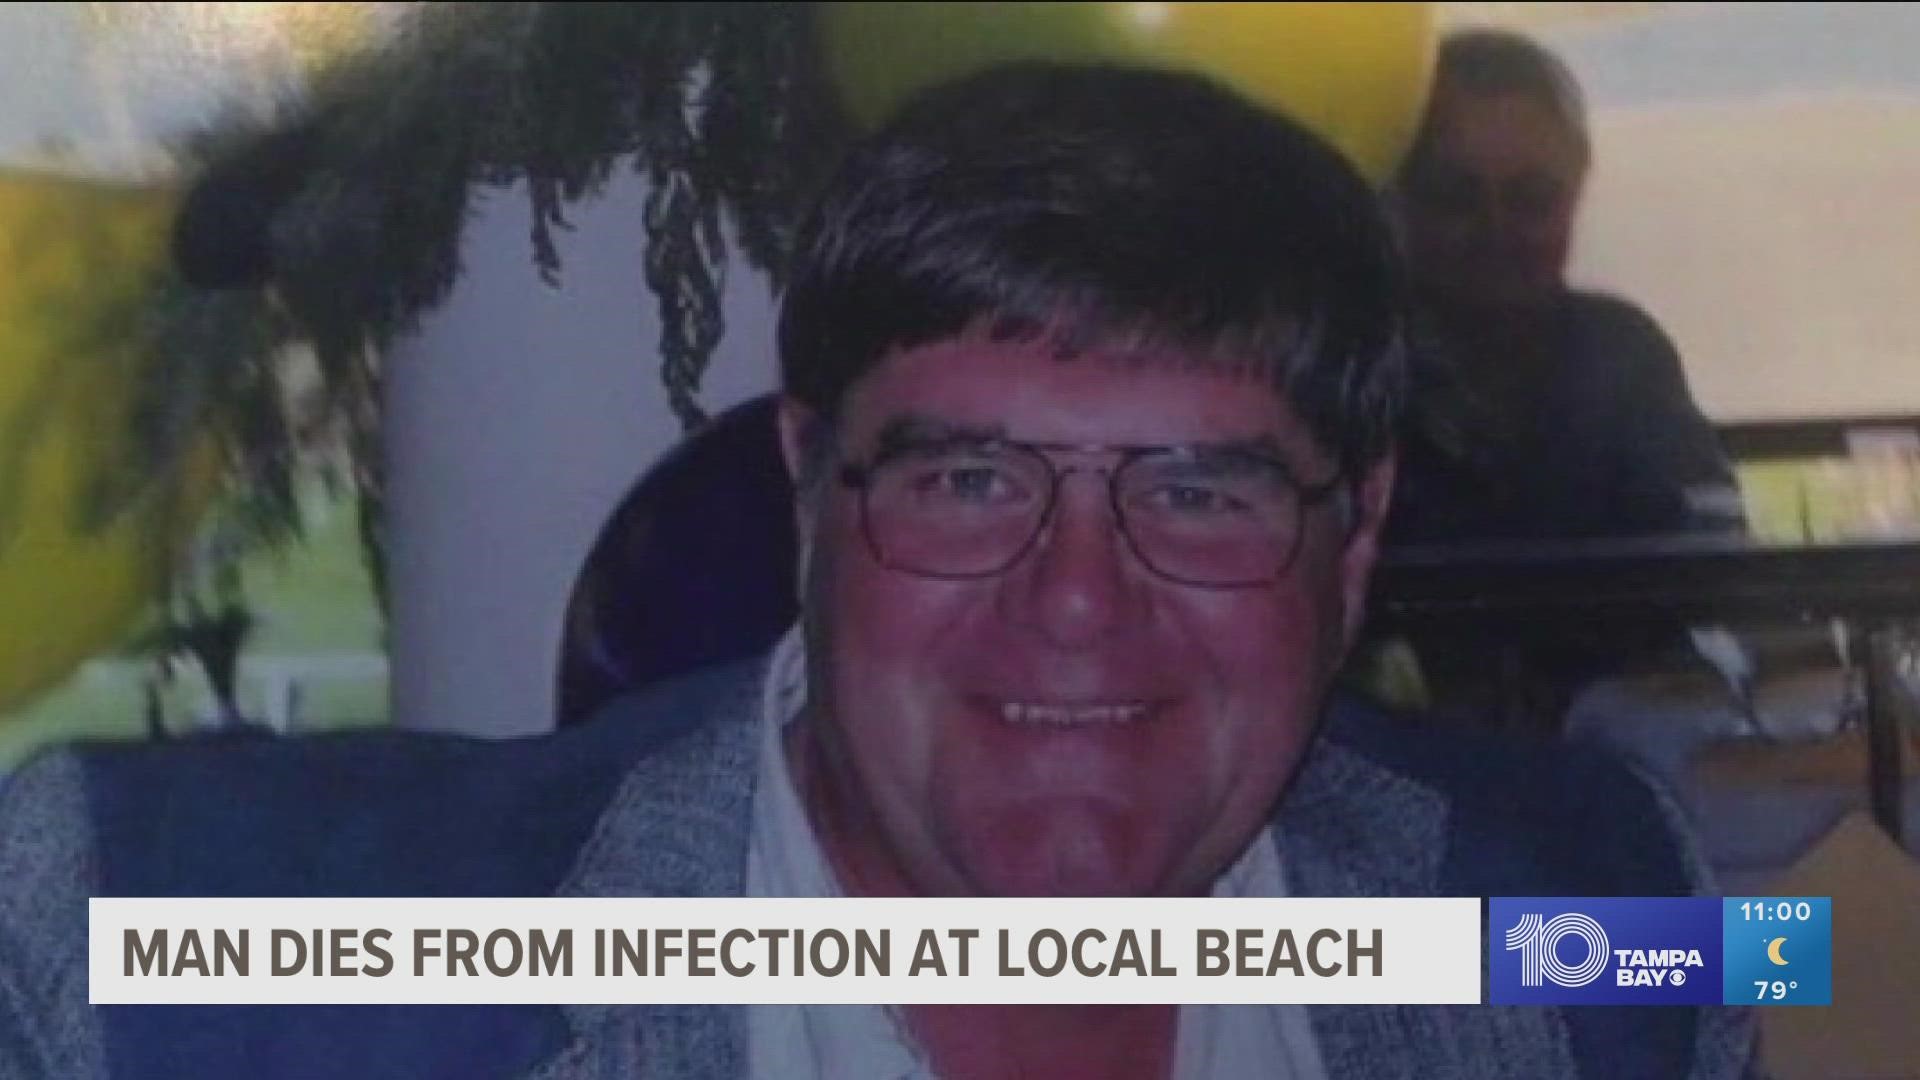 Just days after Robert 'Bobby' Raymond visited the small beach area with his wife, he was dead. "He was everybody's dad, an angel," says his son.